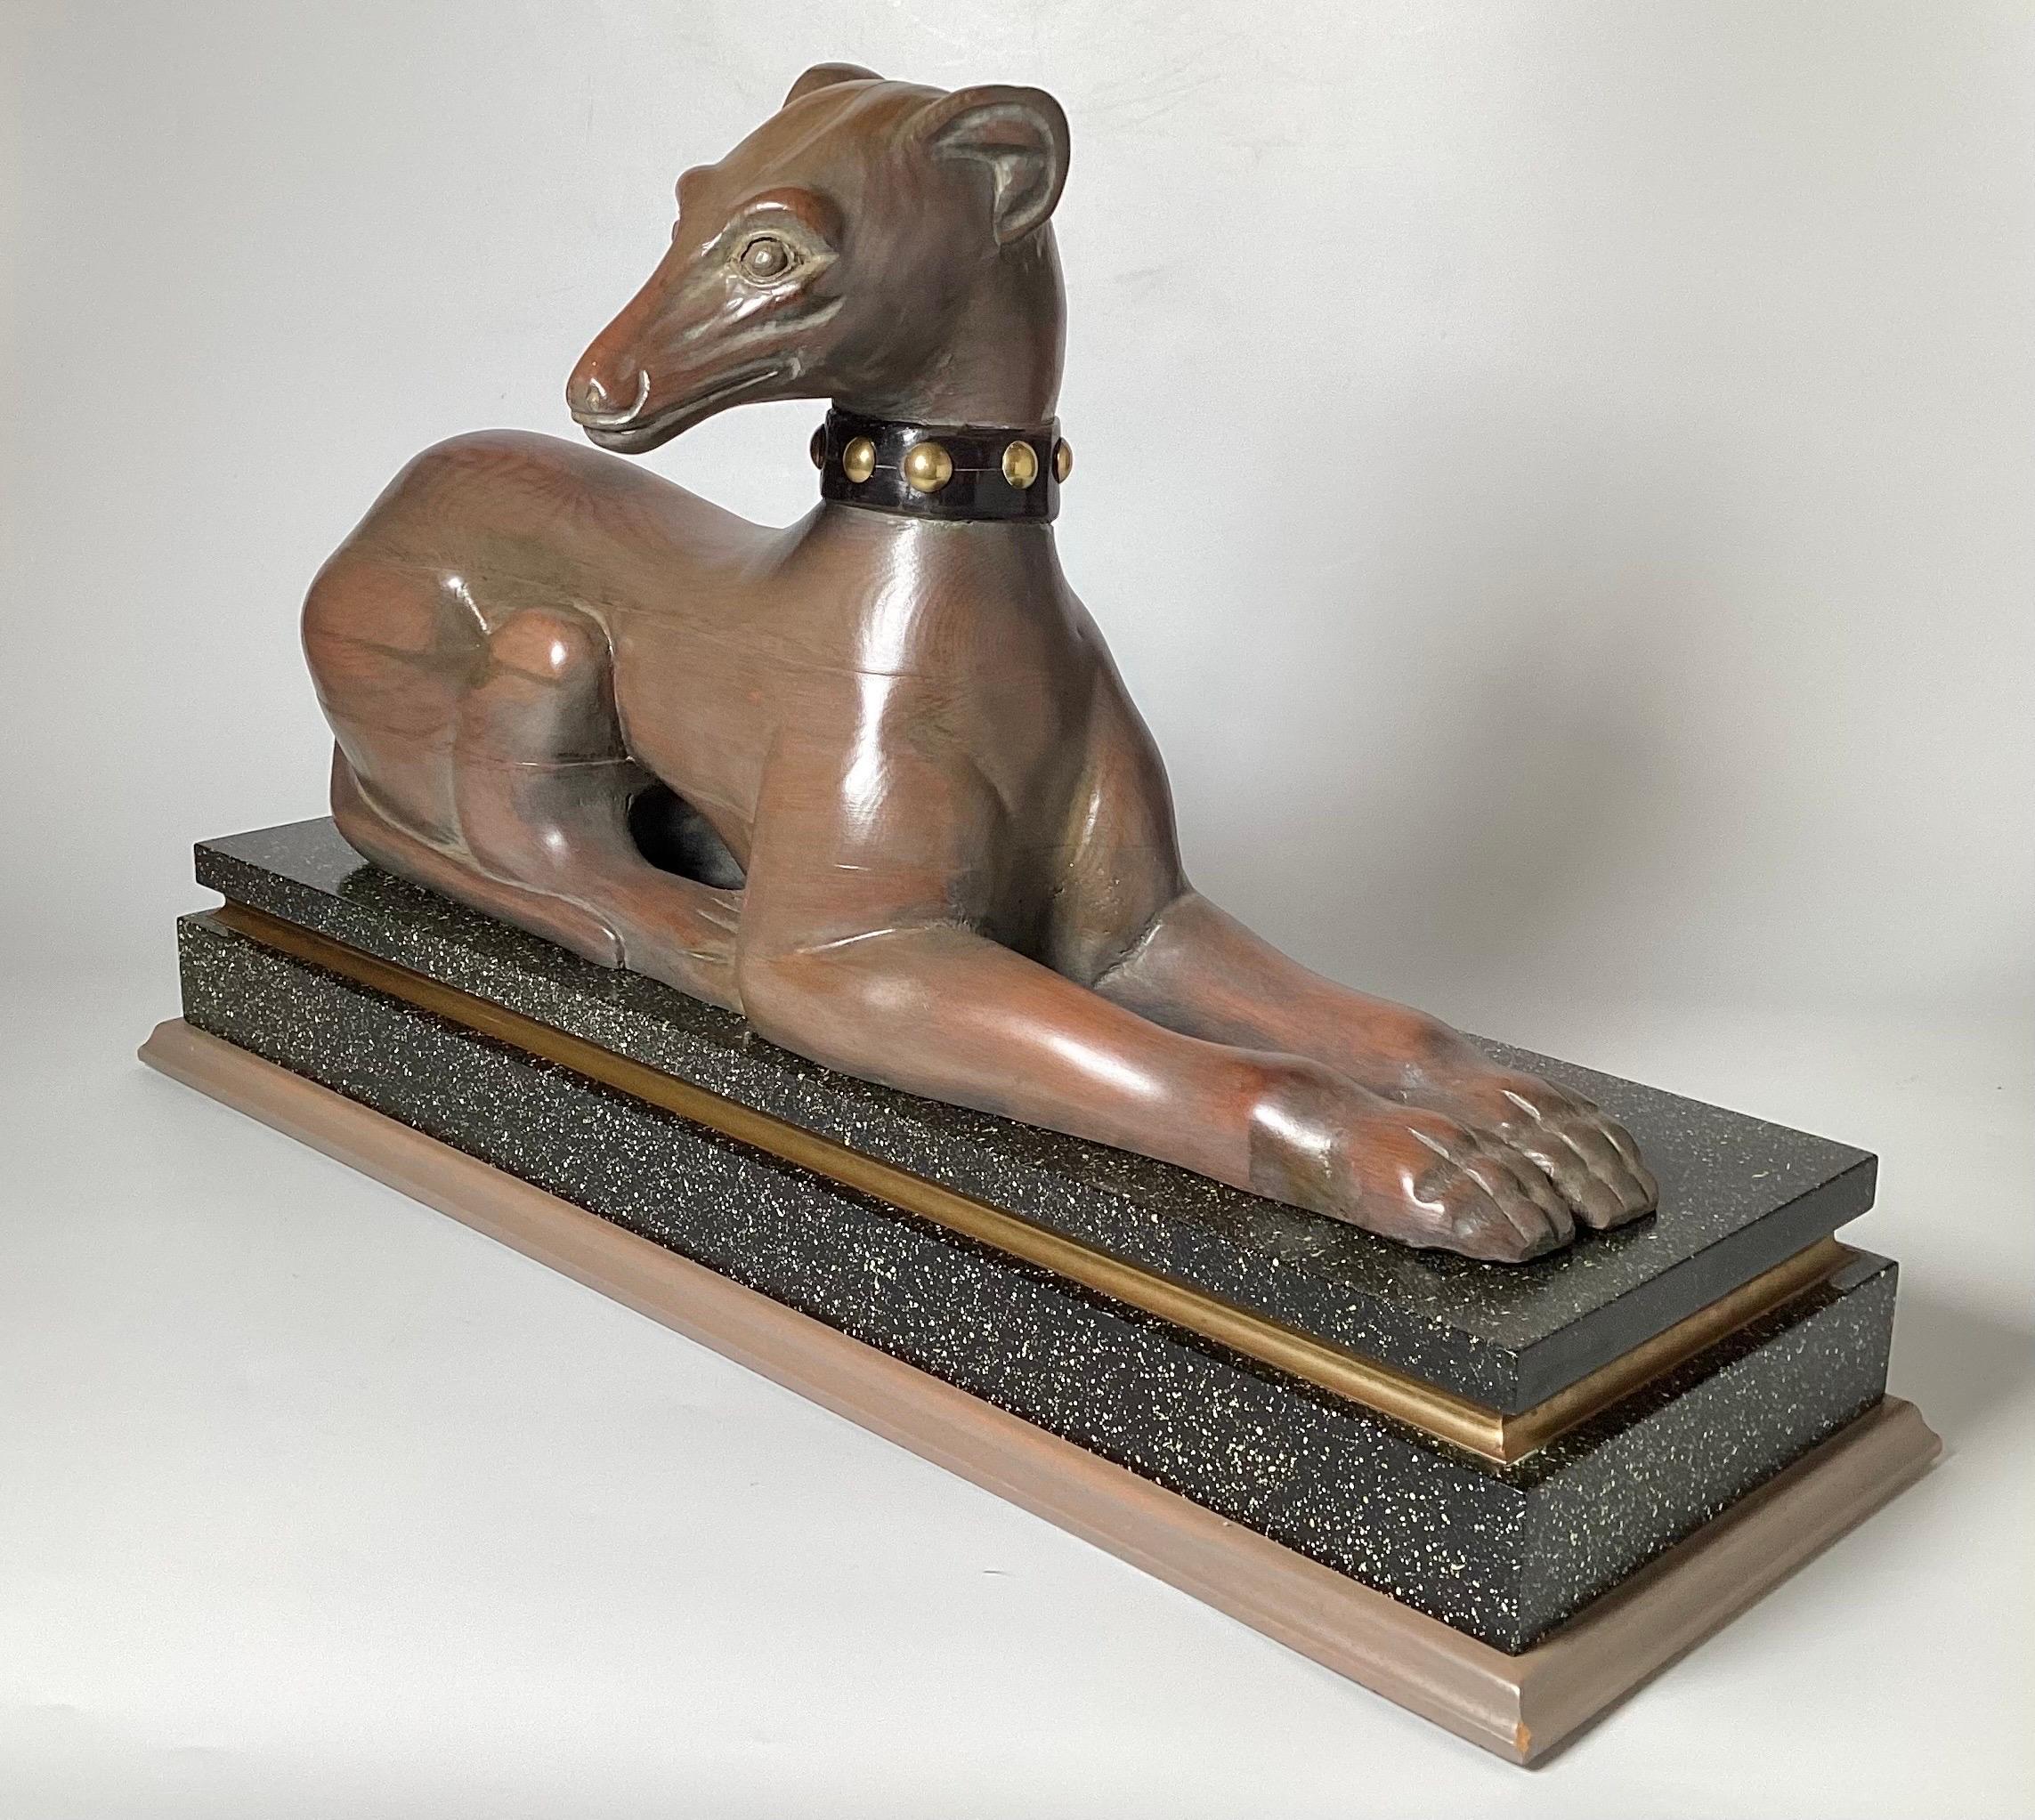 Elegant hand carved sculpture of a whippet on original faux stone painted base. The whippet with painted collar, the body showing warm polished wood and a beautiful wood grain. Made in Spain, mid 20th Century, marked on bottom from the original